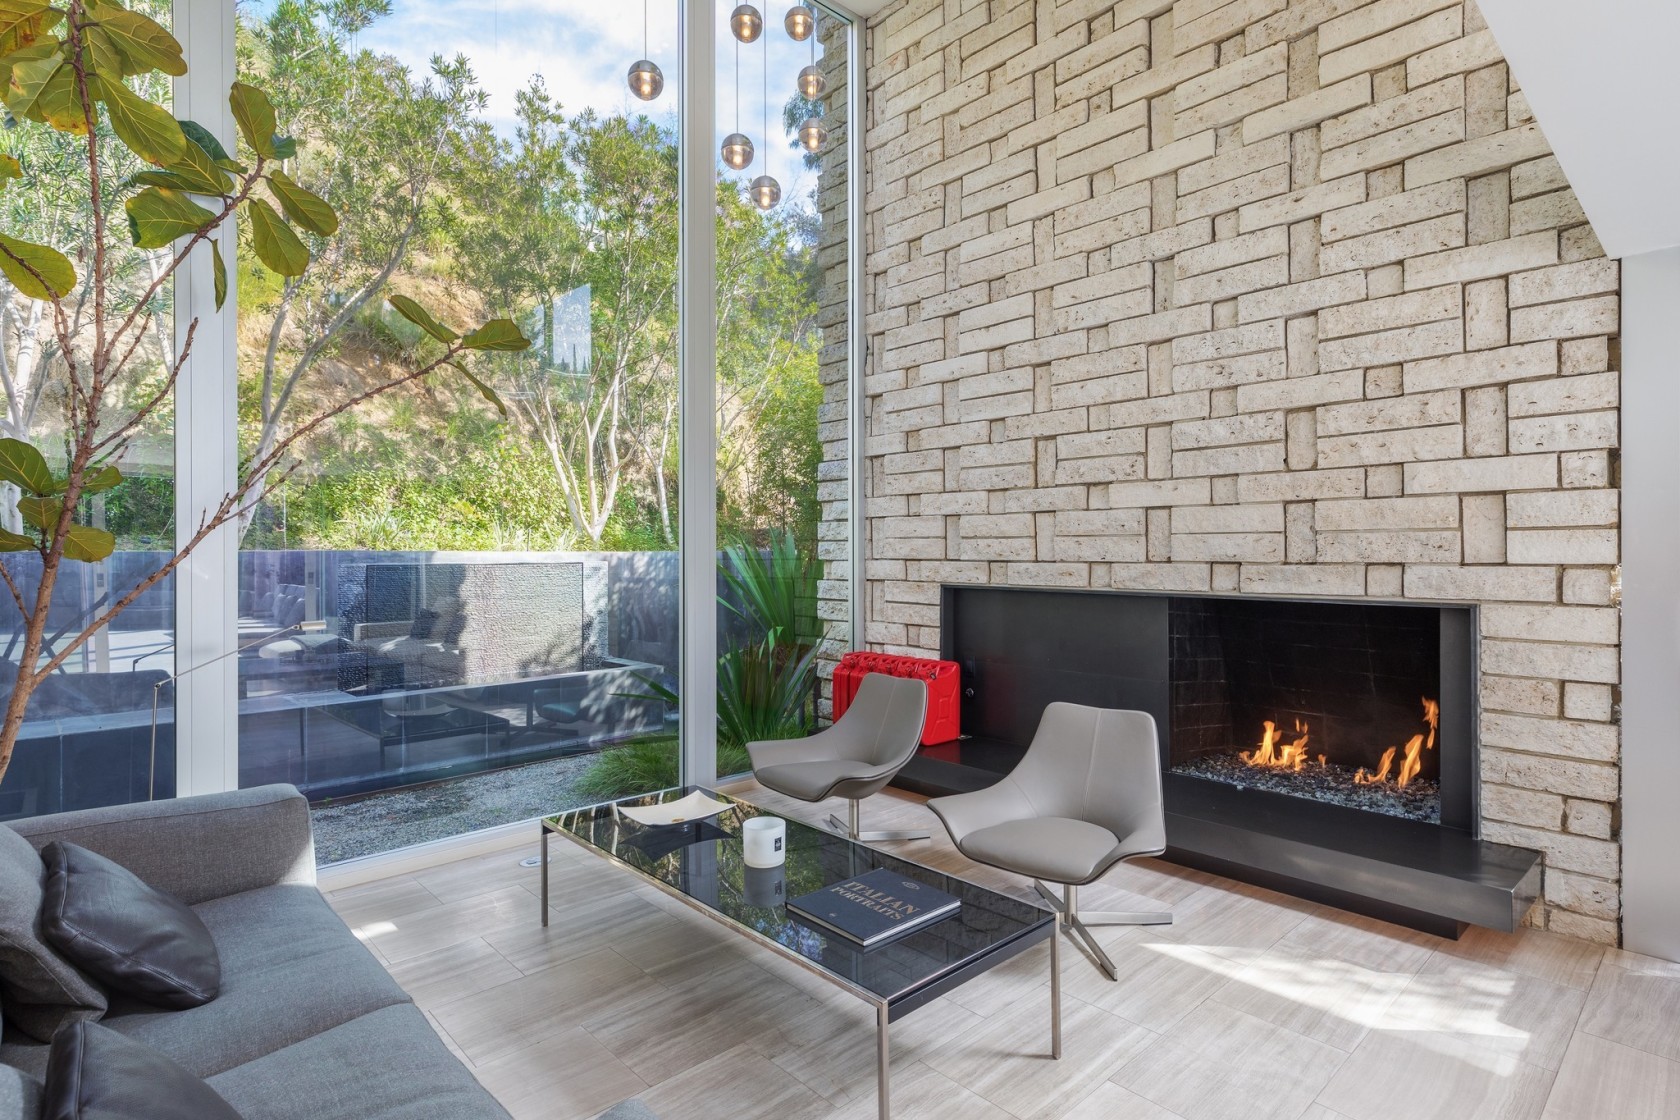 Rendering Fireplace Inspirational Hot Property Alicia Keys S Into the La Jolla State Of